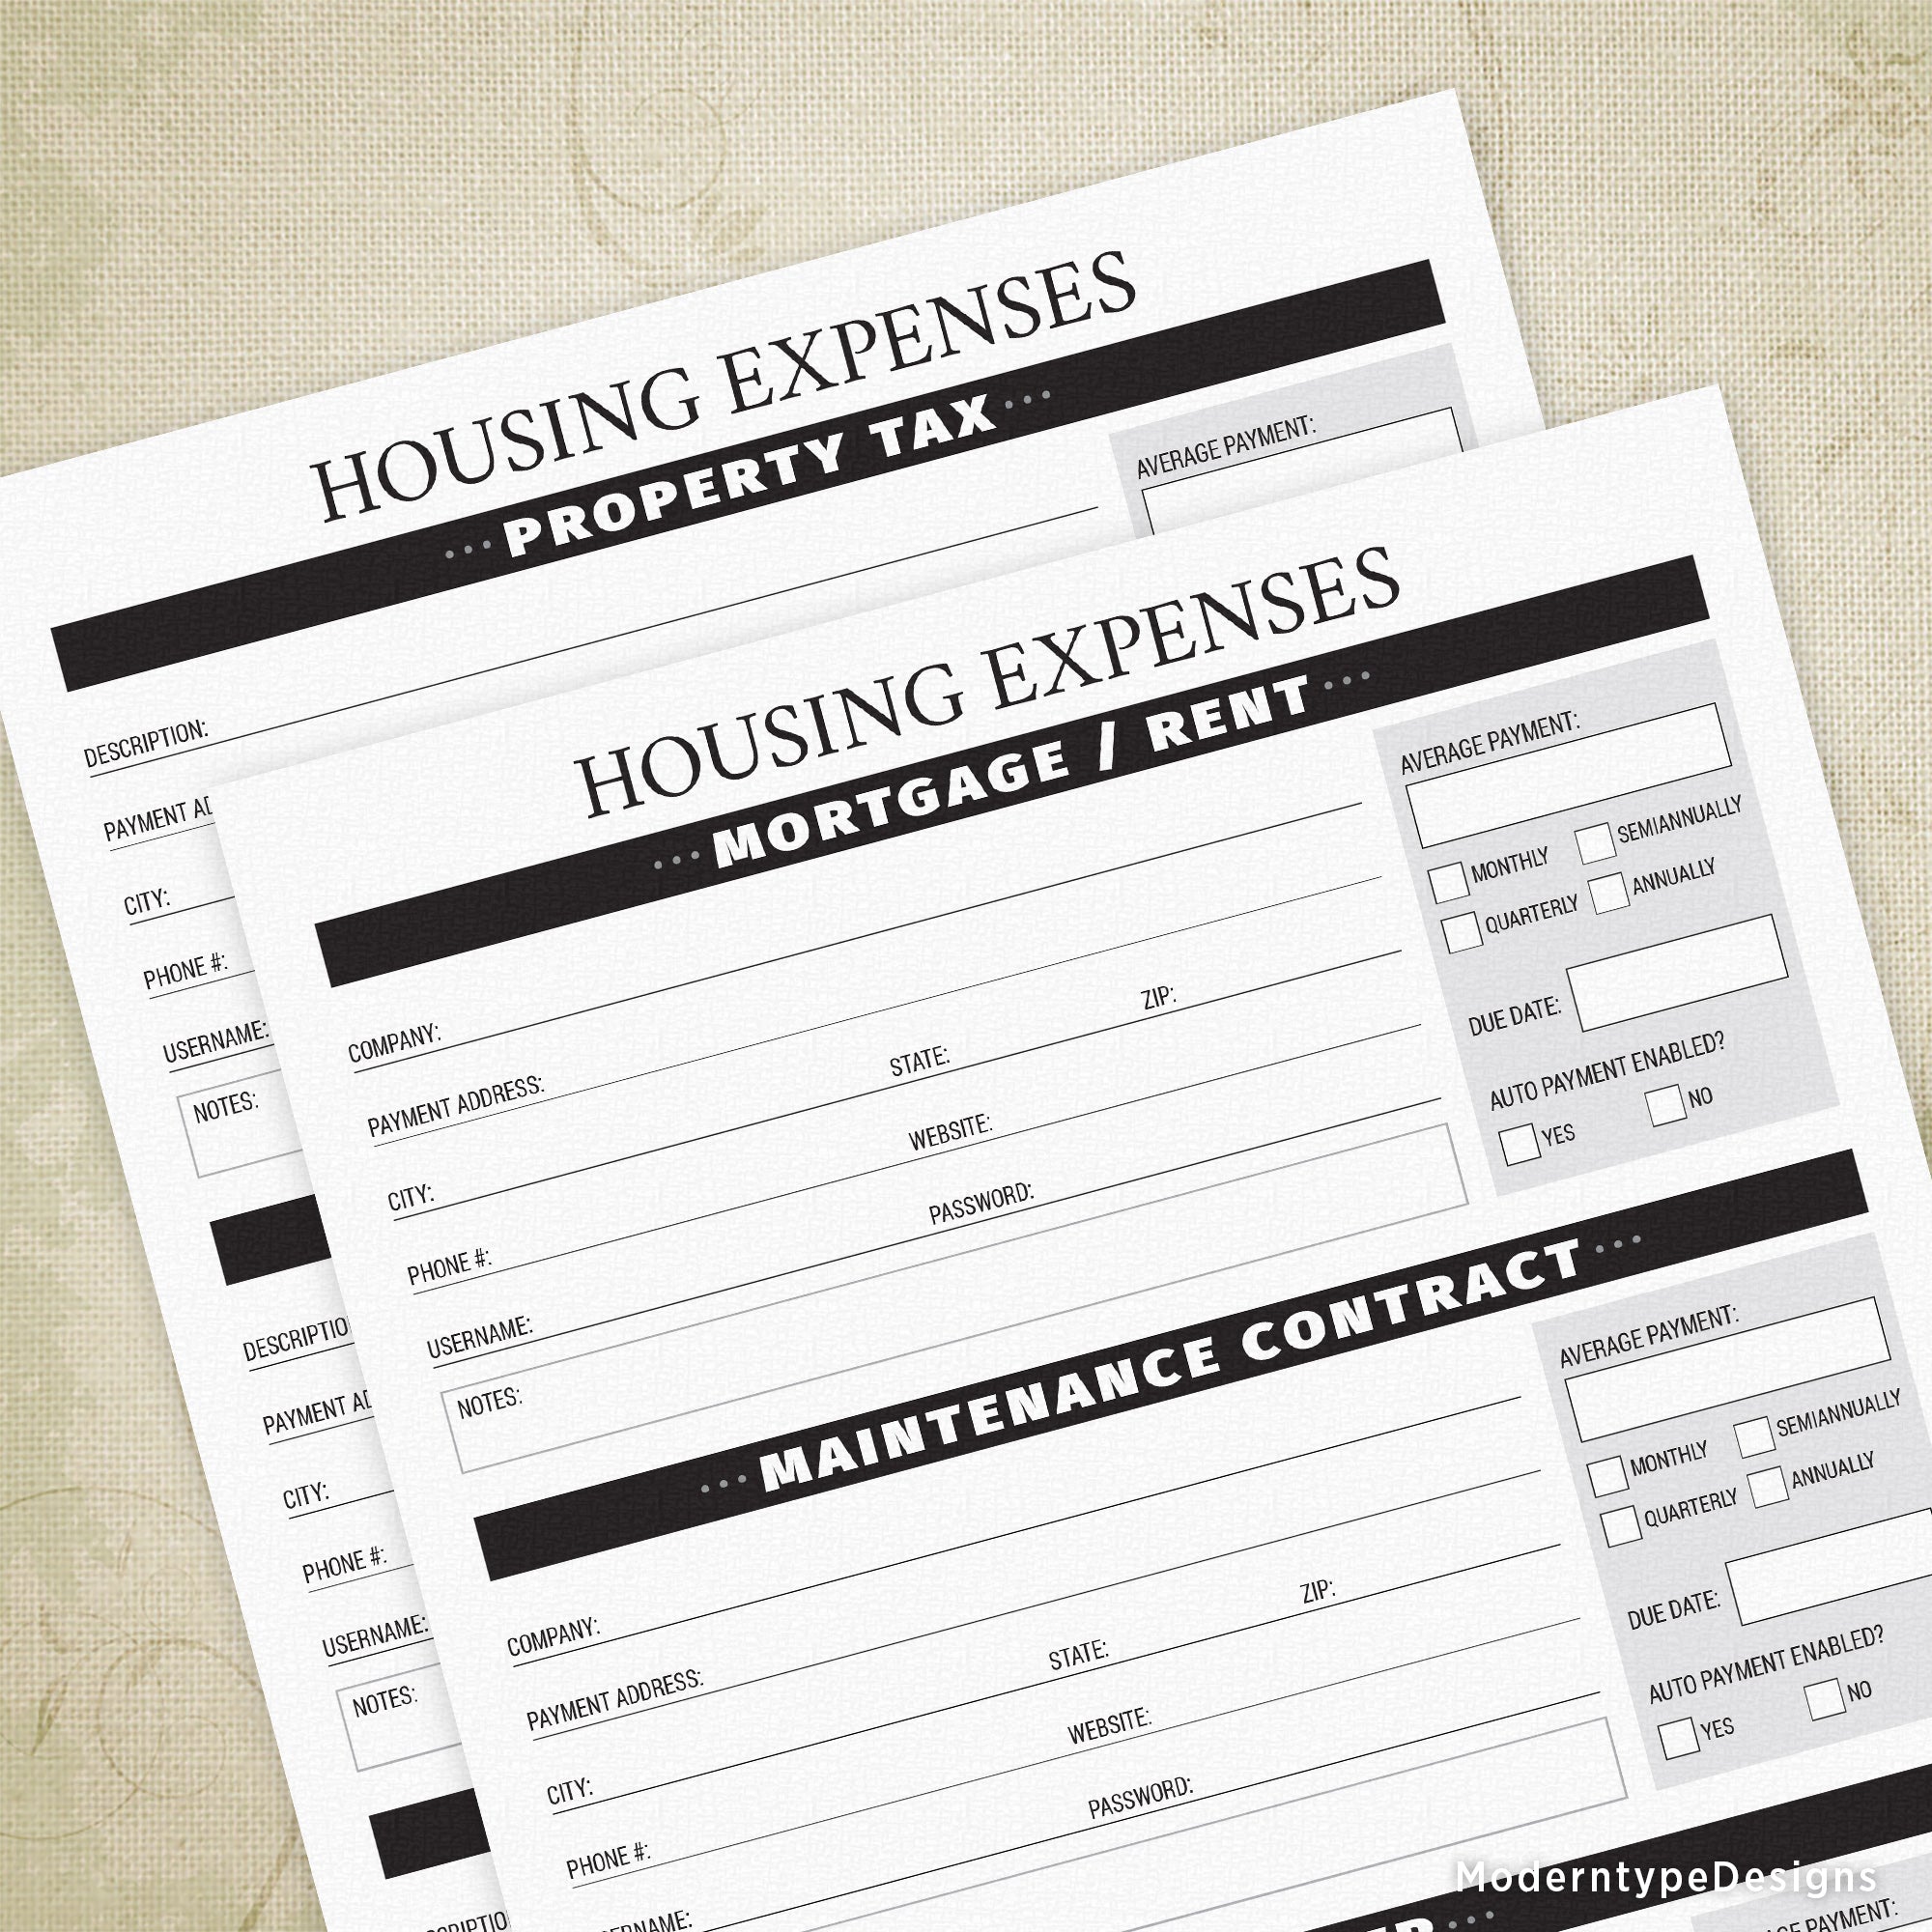 Housing Expenses Printable - End of Life